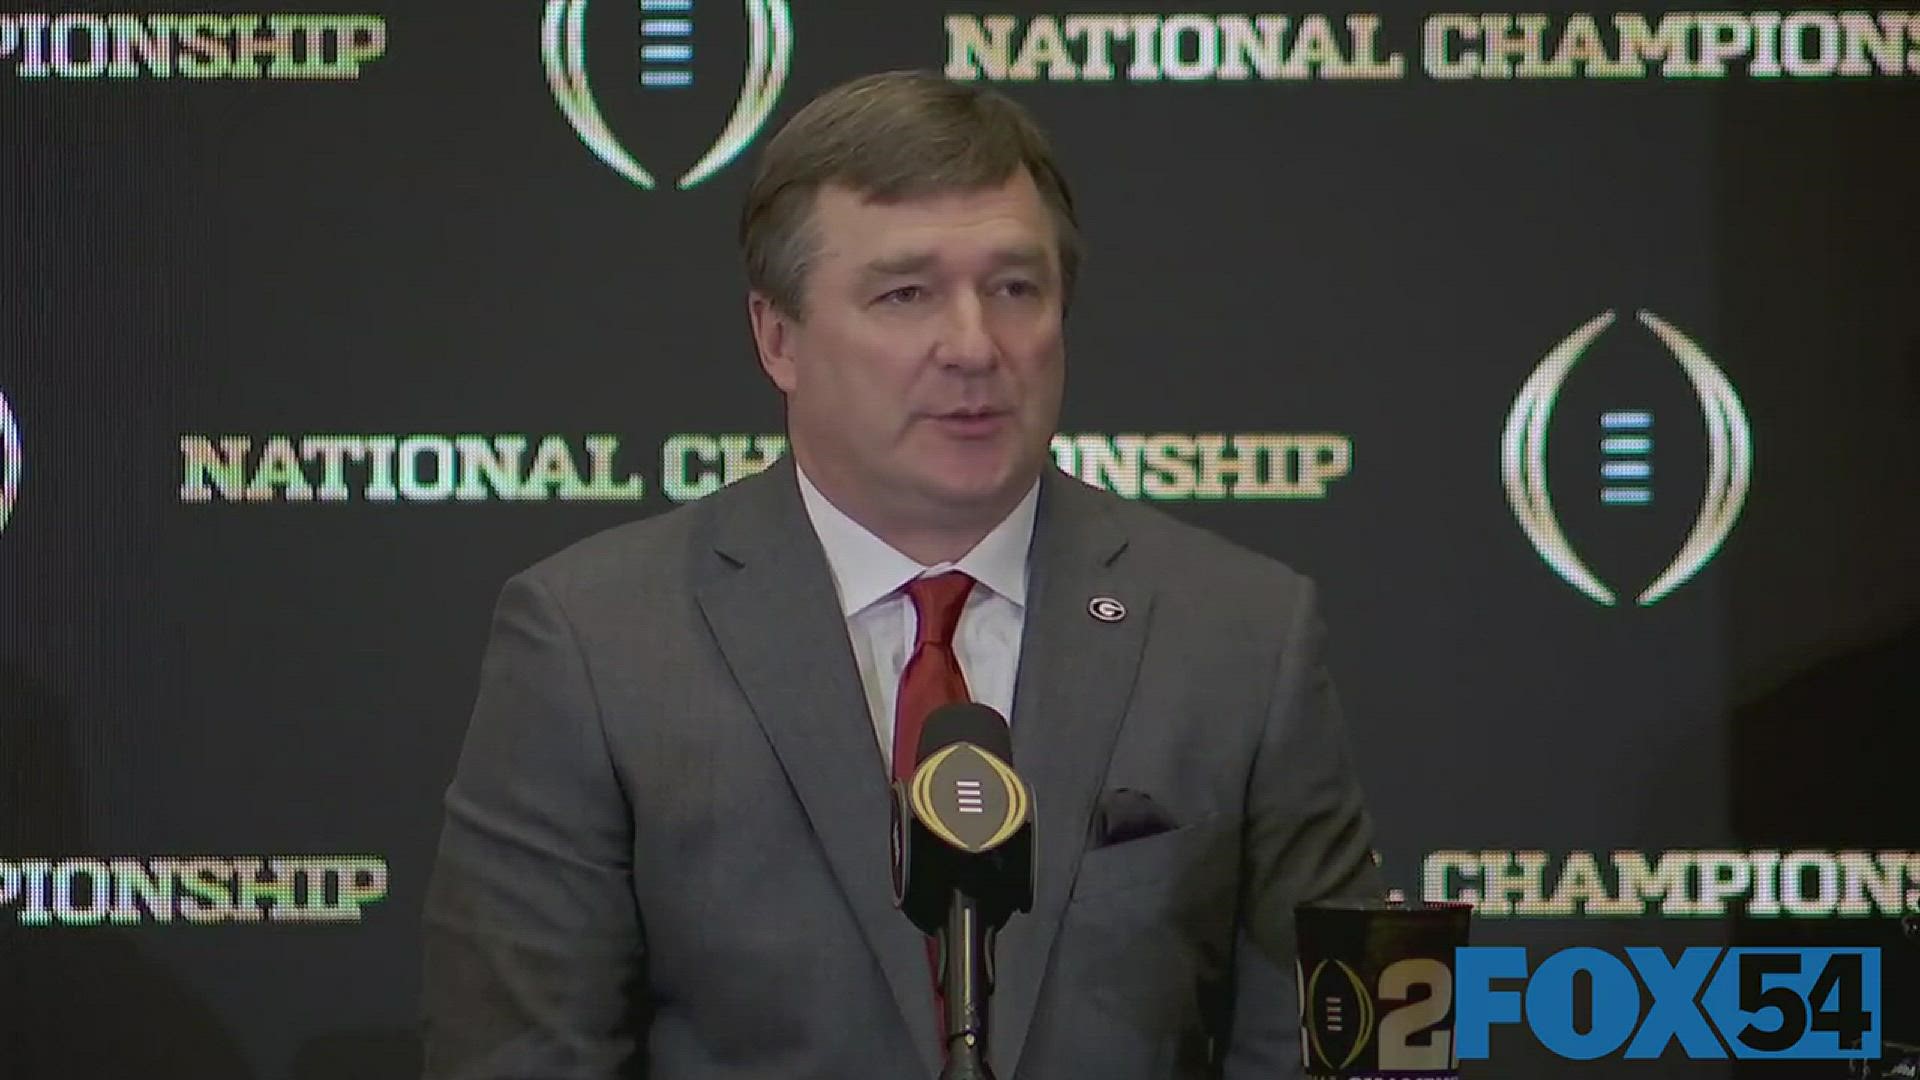 Nick Saban and Kirby Smart exchanged high praises. The two go back nearly two decades, Smart worked on Saban's staff at LSU, Miami [Dolphins] and Alabama.